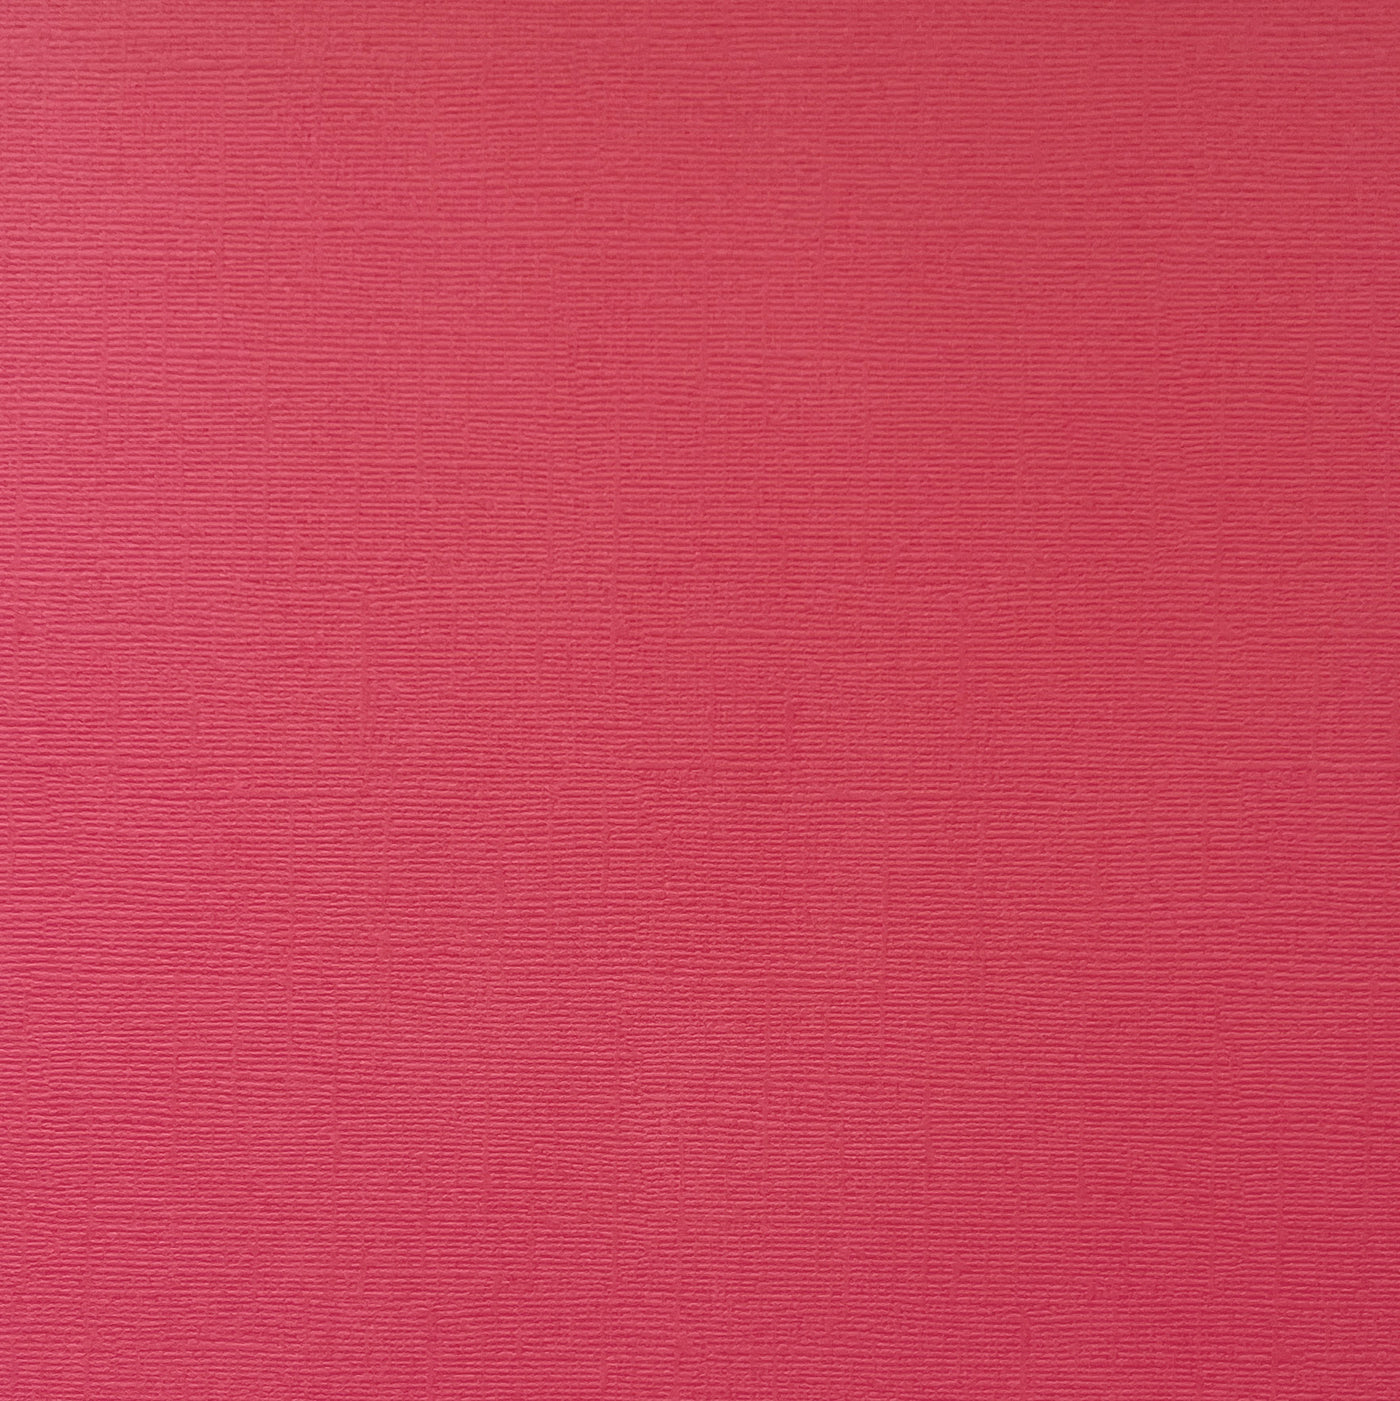 RED CURRANT - Textured 12x12 Cardstock - Encore Paper